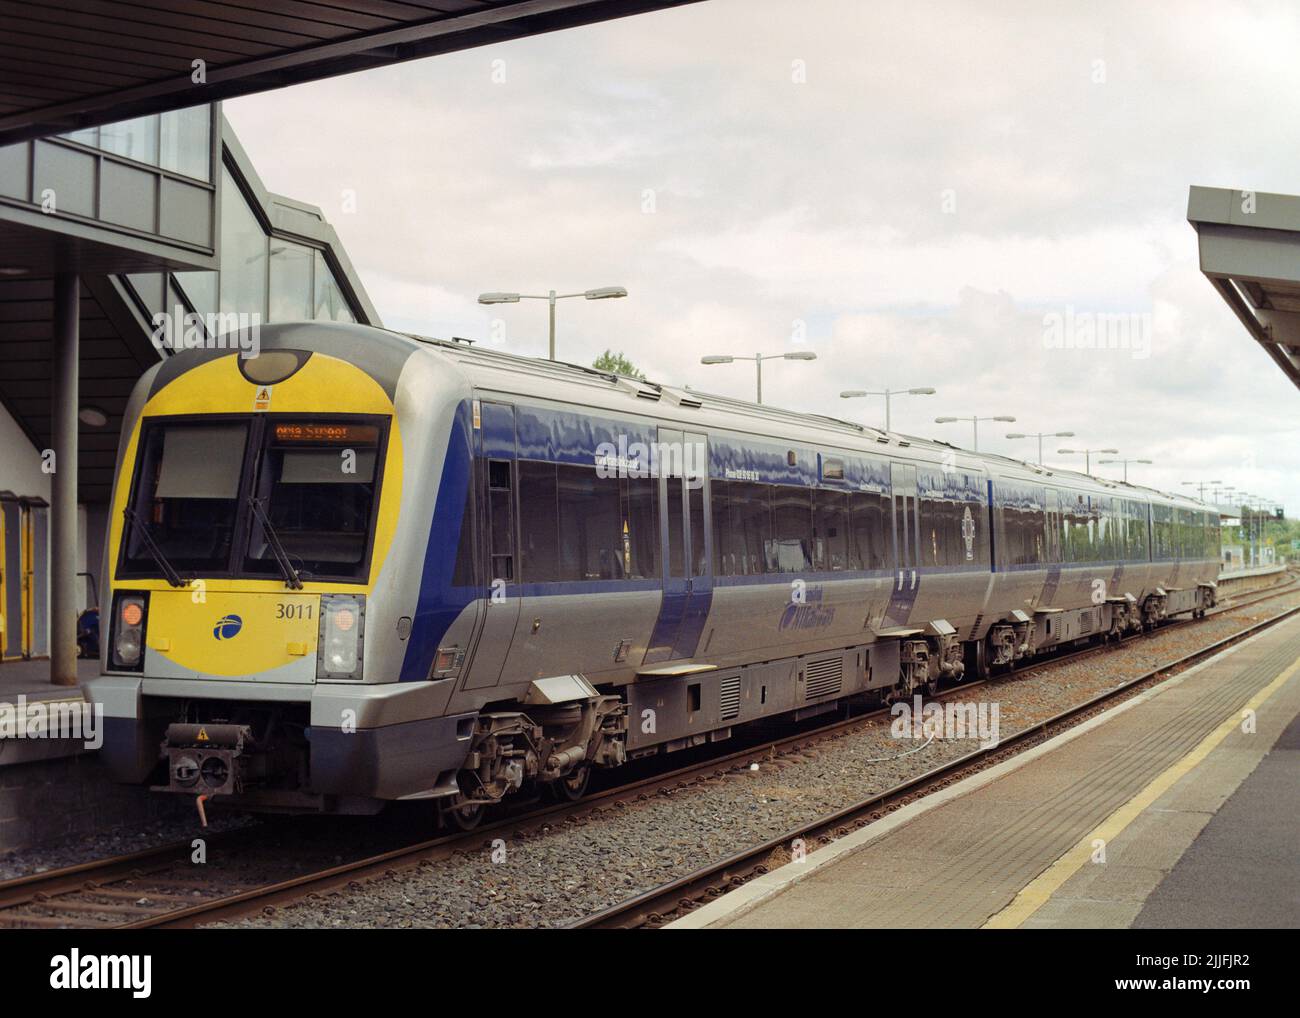 Portadown, UK - 4 July 2022: A passenger train (Class 3000) operated by NIR (Northern Ireland Railways) at Portadown station to Belfast direction. Stock Photo